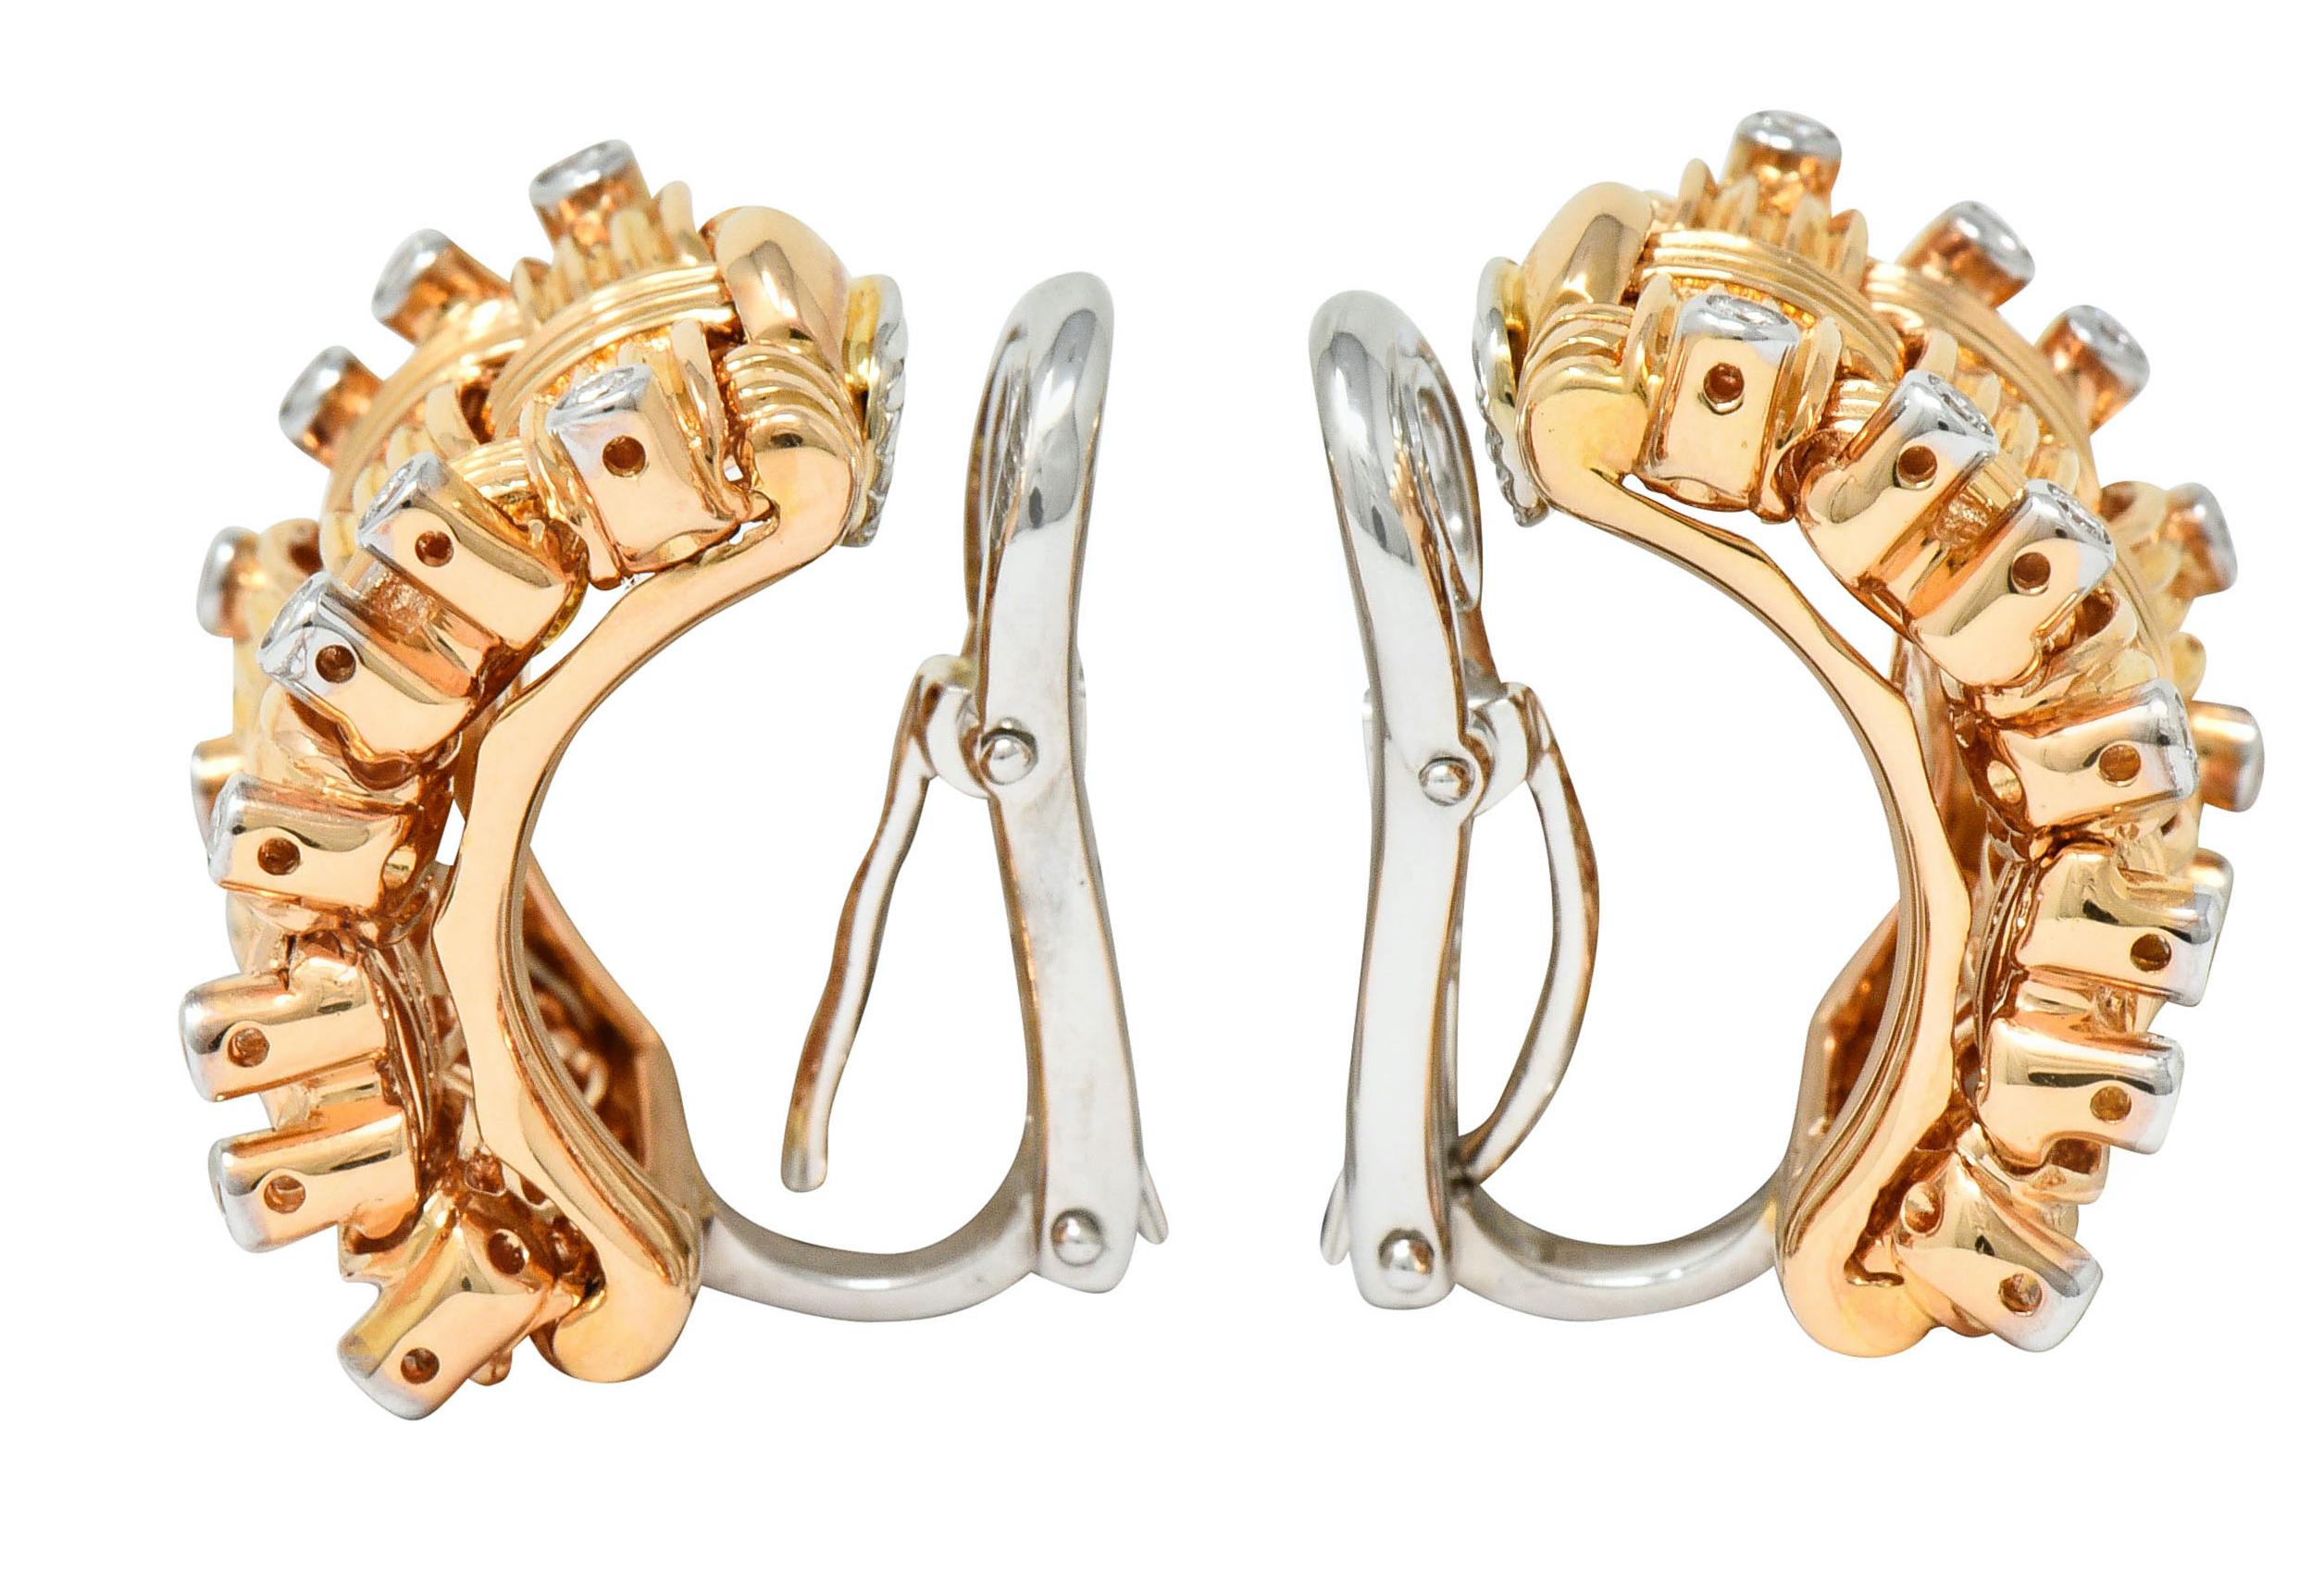 Earrings are designed as a brightly polished woven motif; slightly articulated

Flanked by bezel set round brilliant cut diamond edges

Weighing in total approximately 0.42 carat; G/H color with SI clarity

Completed by white gold hinged omega backs